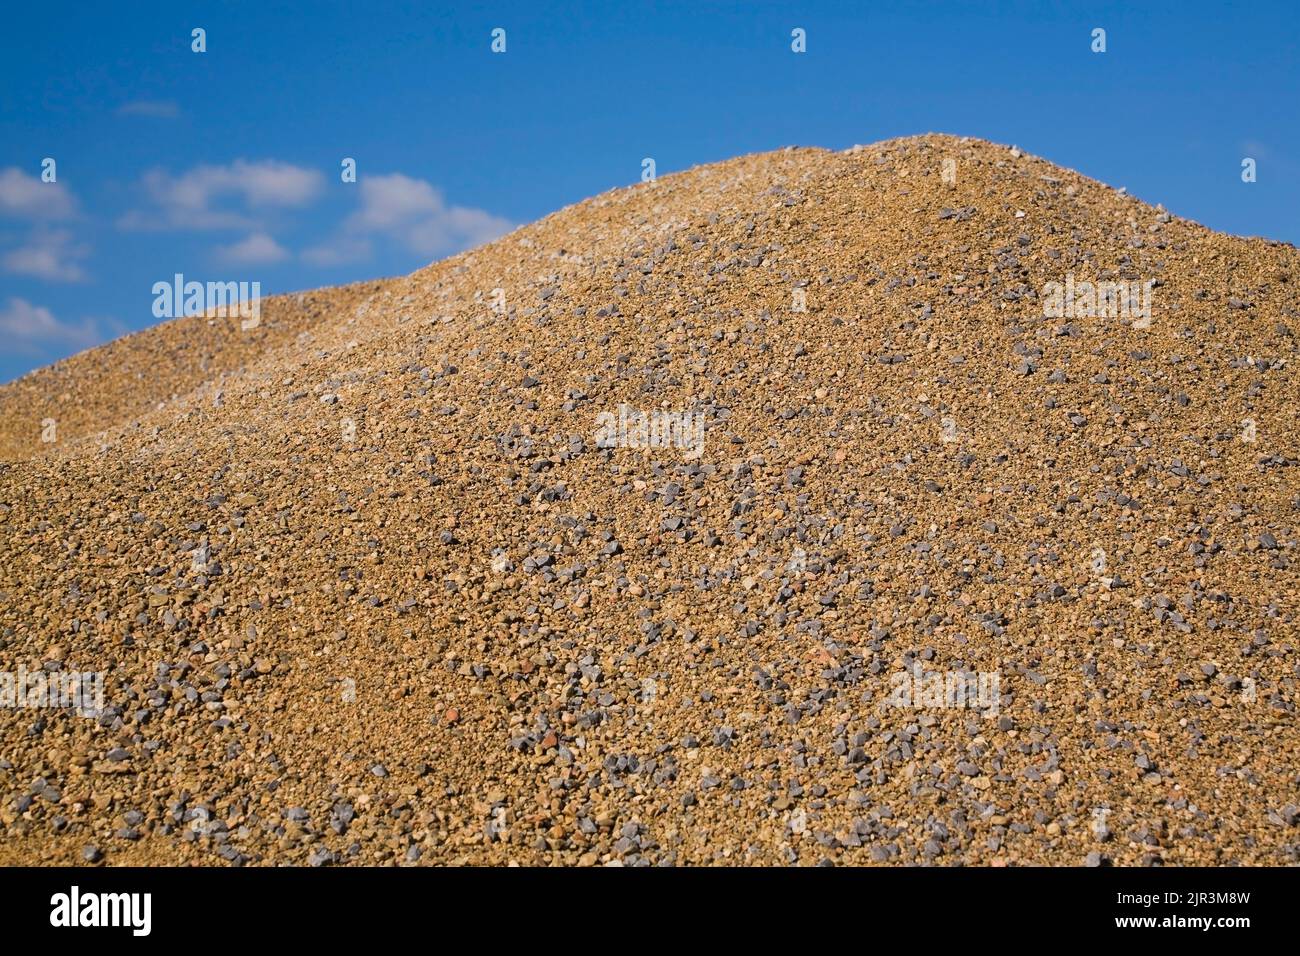 Mound of coarse sand and pebbles in a commercial sandpit. Stock Photo